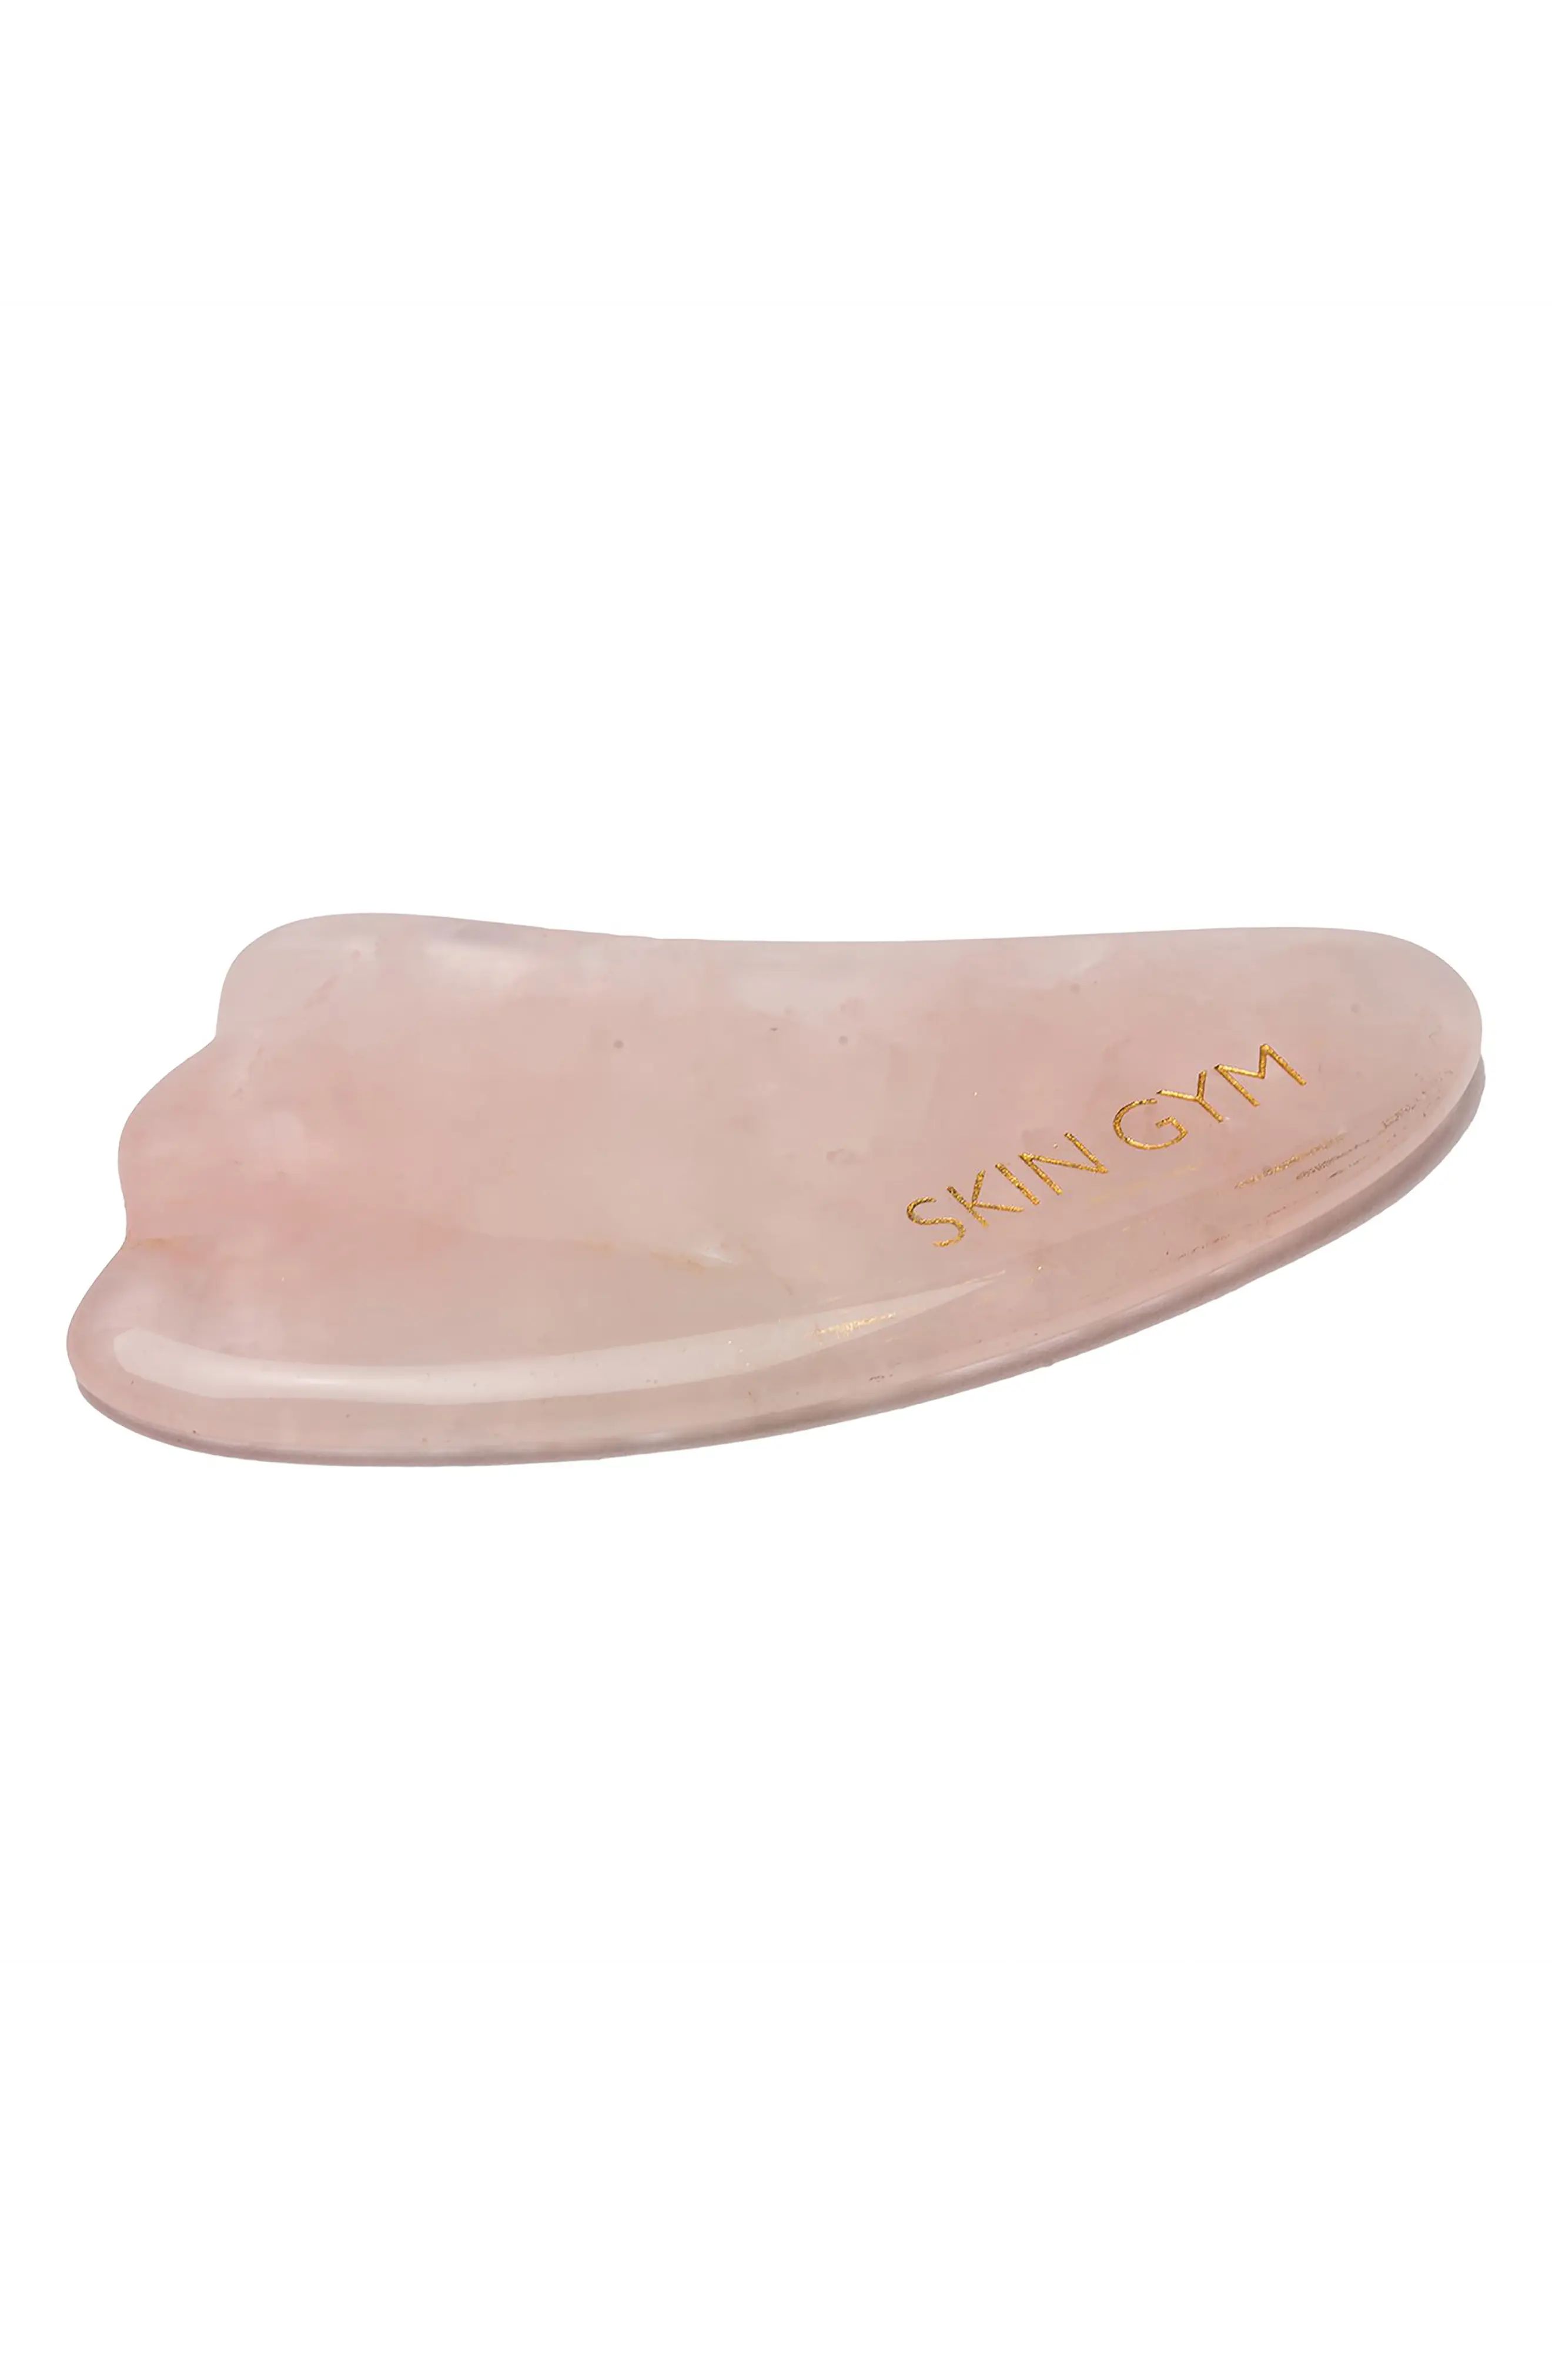 Skin Gym Rose Quartz Crystal Gua Sha Sculpty Facial Tool, Size One Size - Pink | Nordstrom